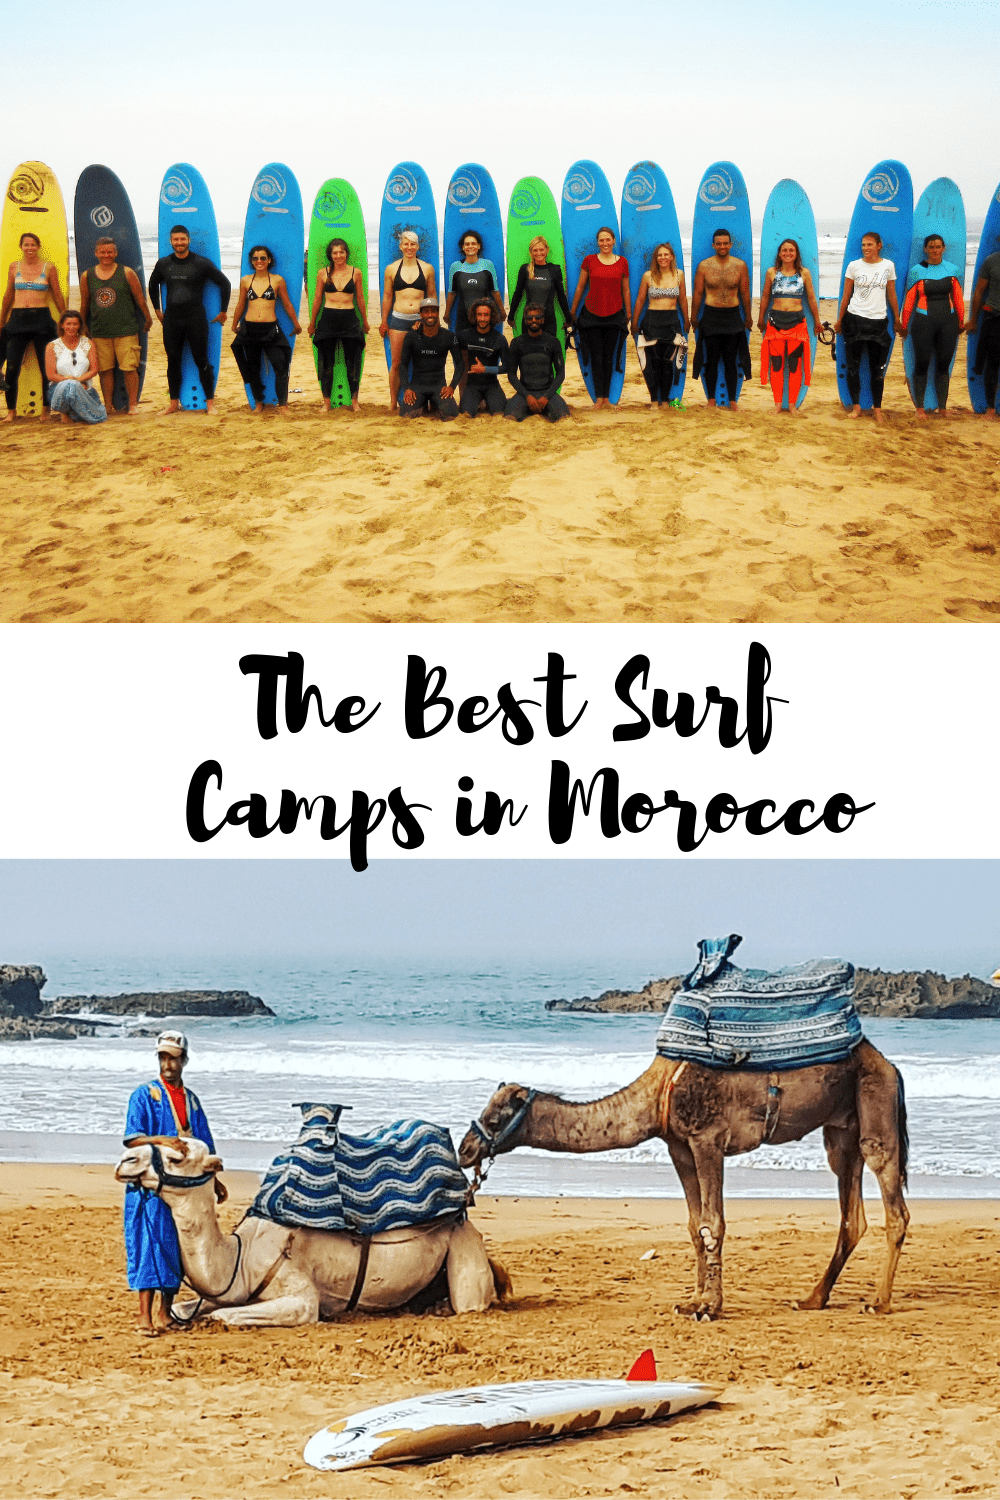 Best Surf Camps in Morocco